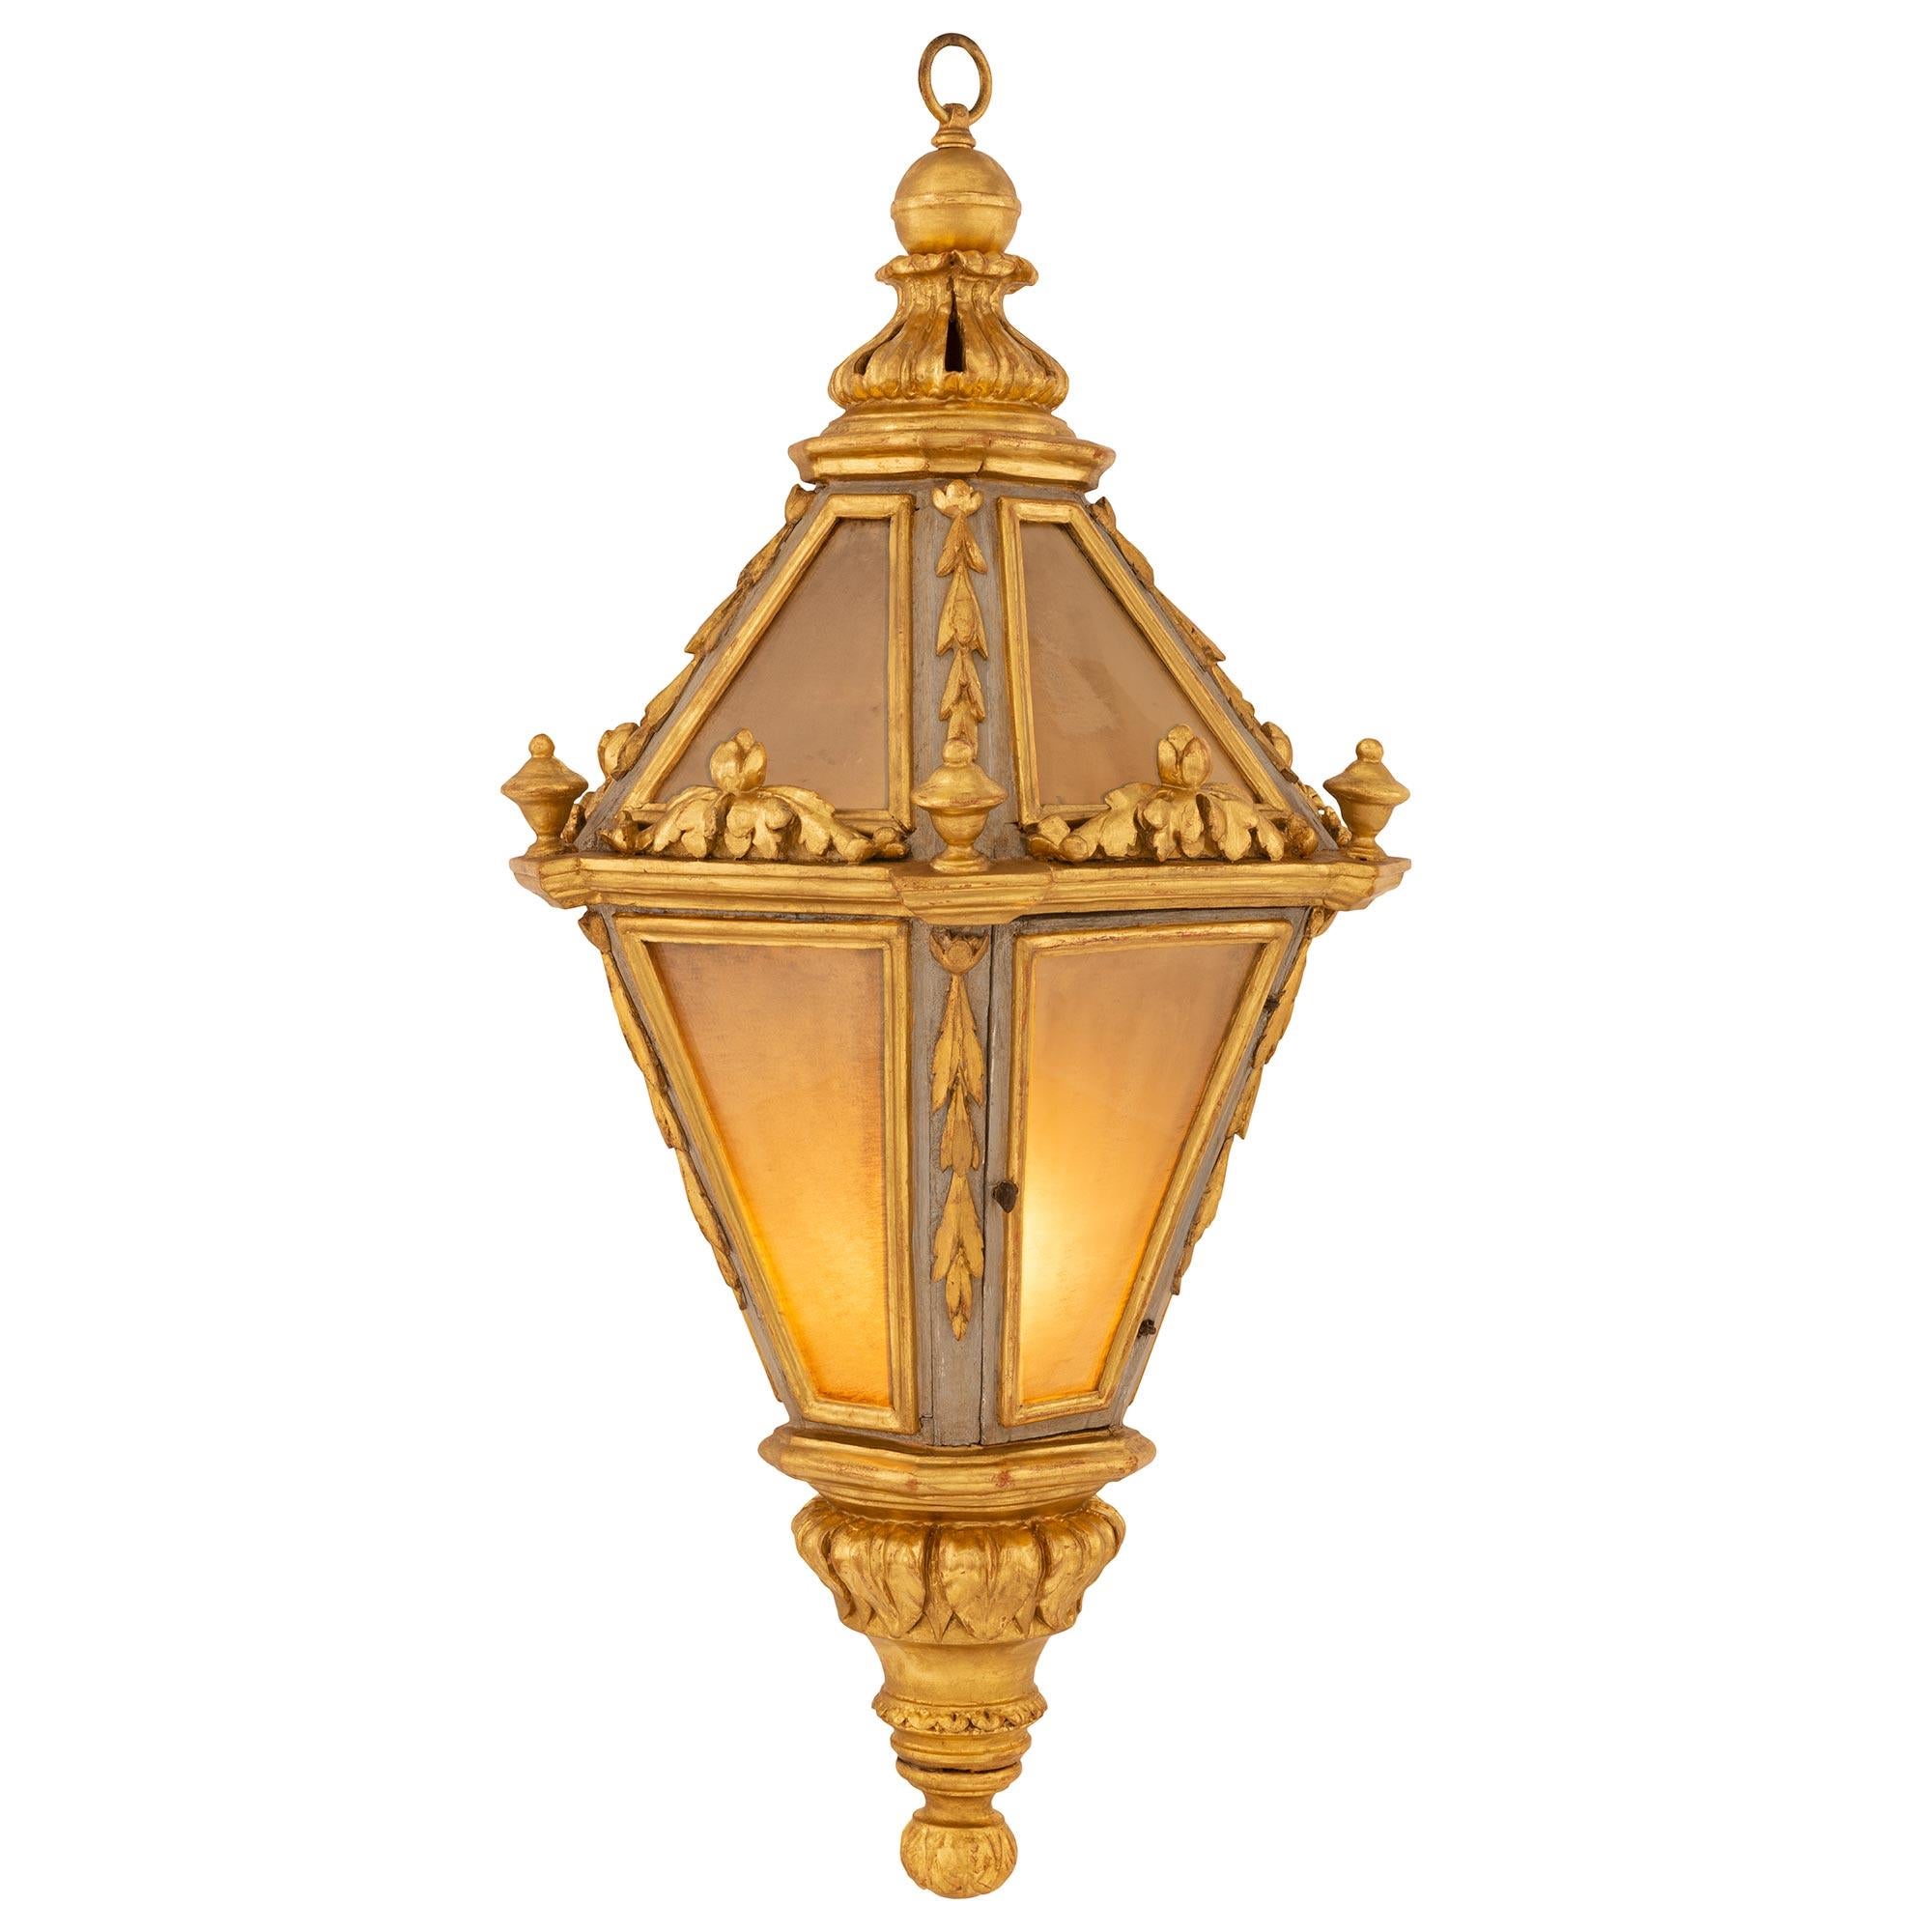 An outstanding Italian early 19th century Venetian st. patinated and giltwood lantern. The lantern is centered by a charming bottom foliate final below lovely richly carved acanthus leaves and foliate designs. The pentagonal shaped body retains its